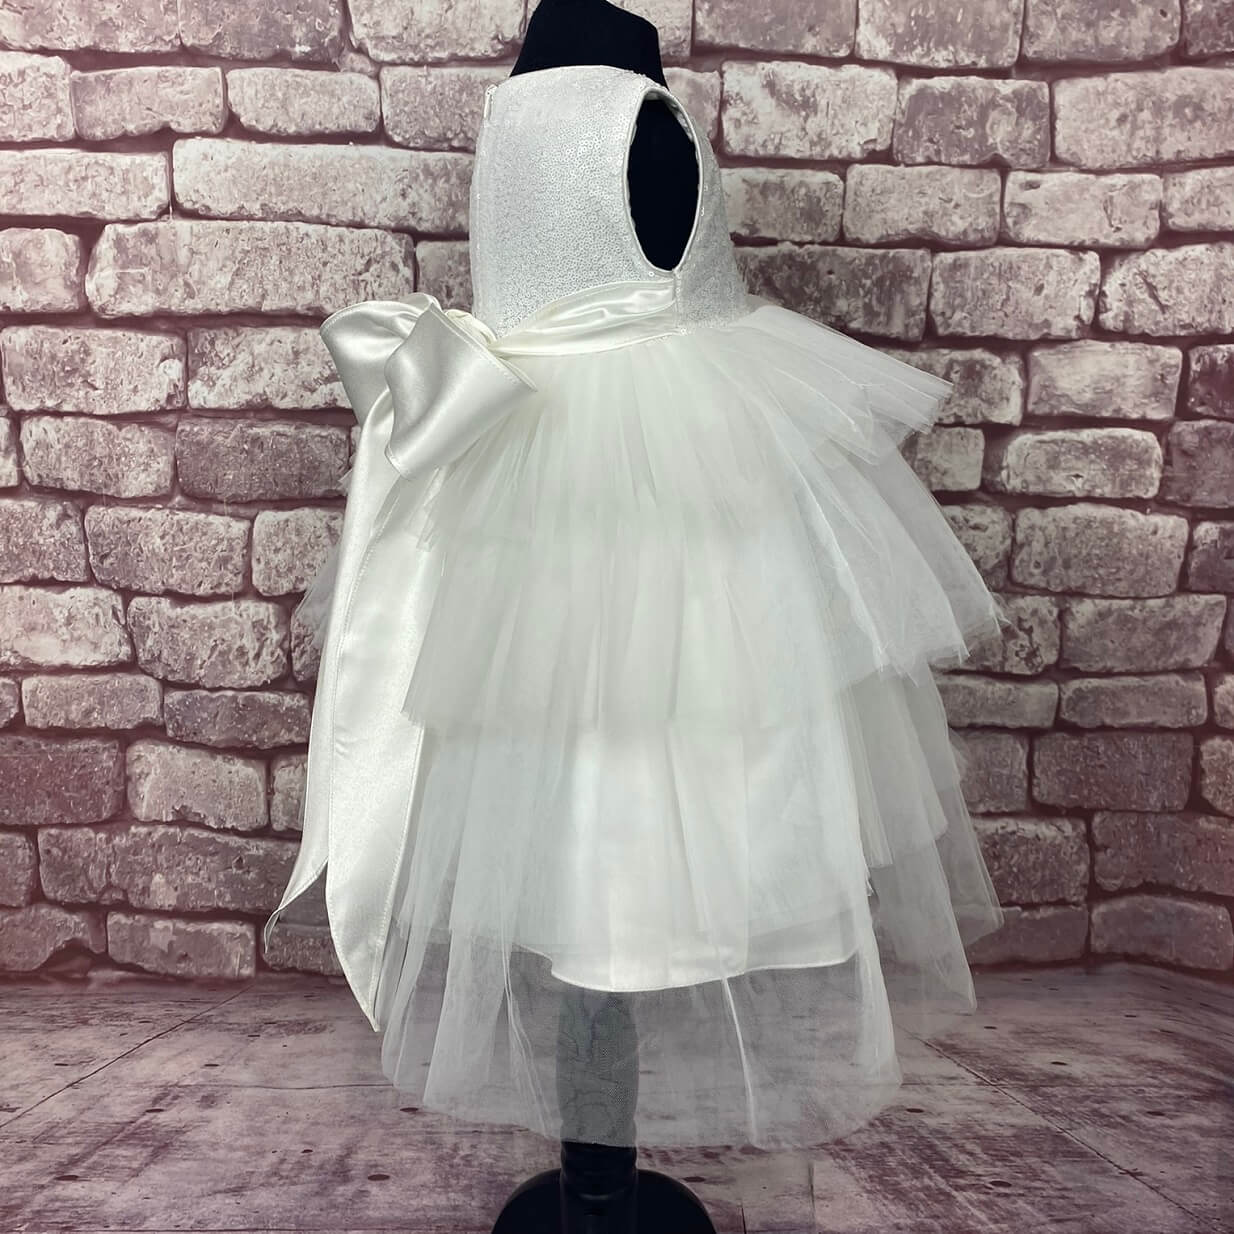 Side image of dark whit occasion dress